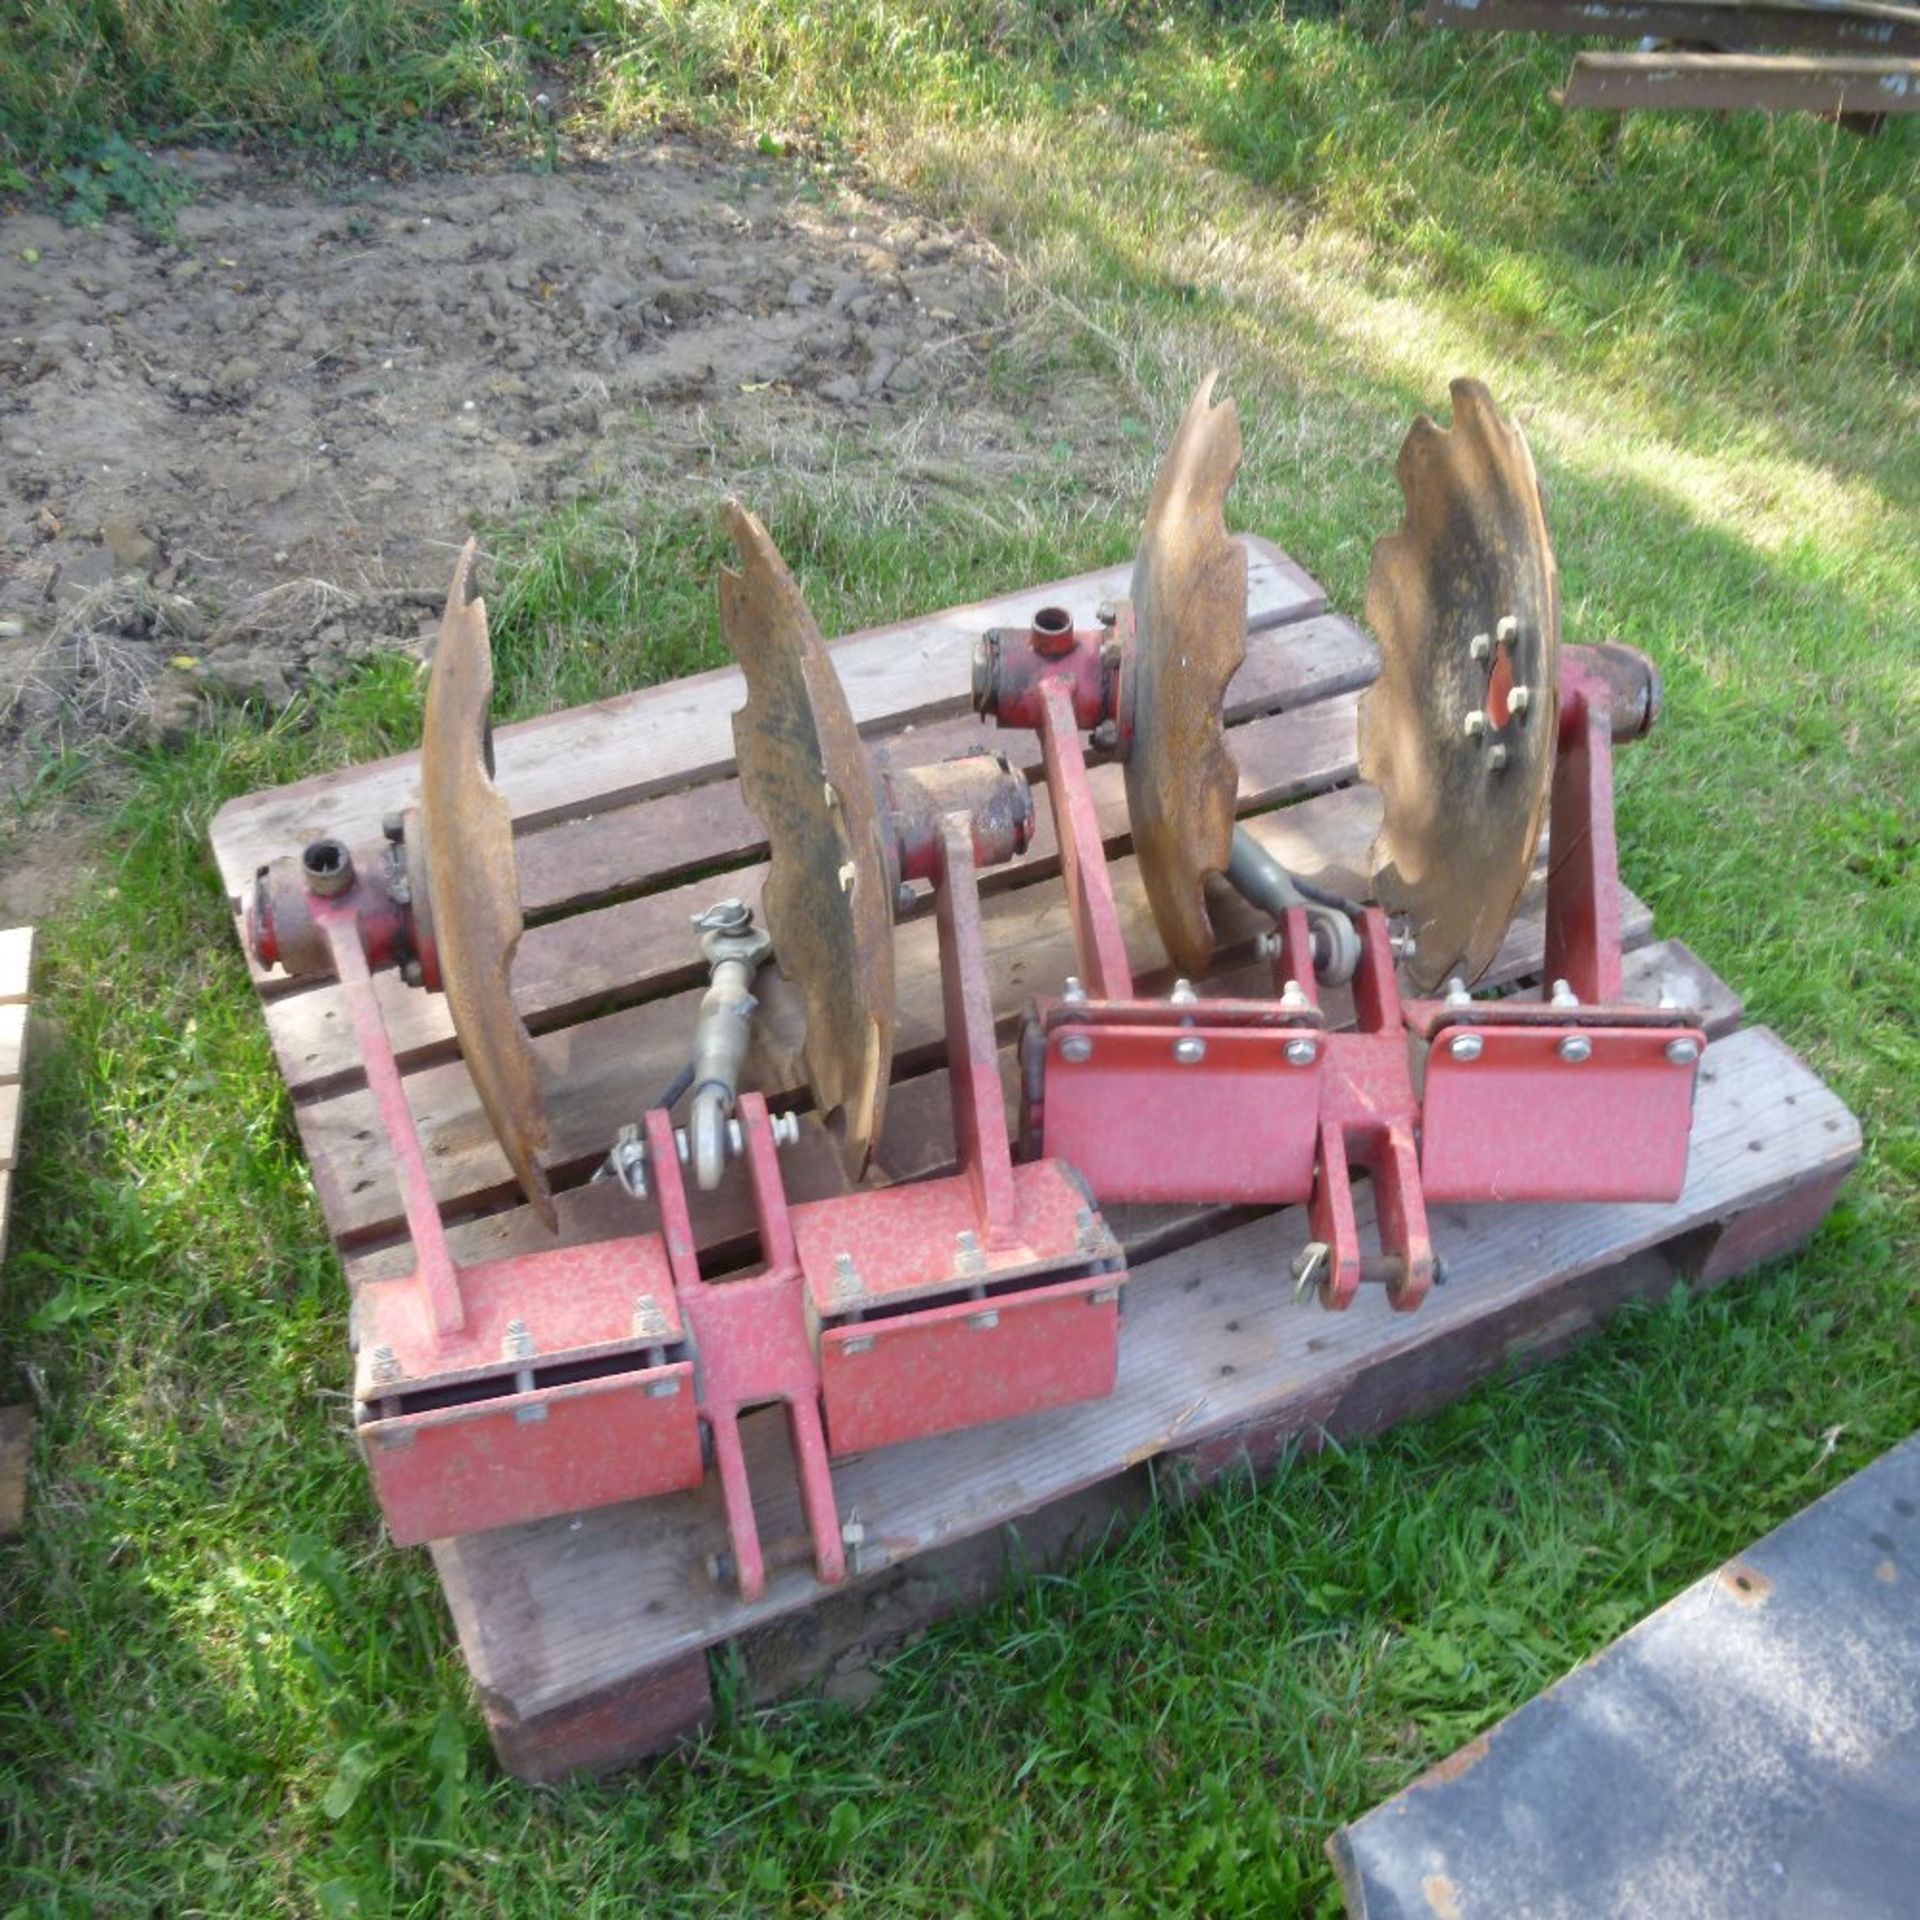 HE - VA 5 tine subsoiler with roll (SN28588) and air seeder unit, c/w homemade attachment for discs, - Image 5 of 7